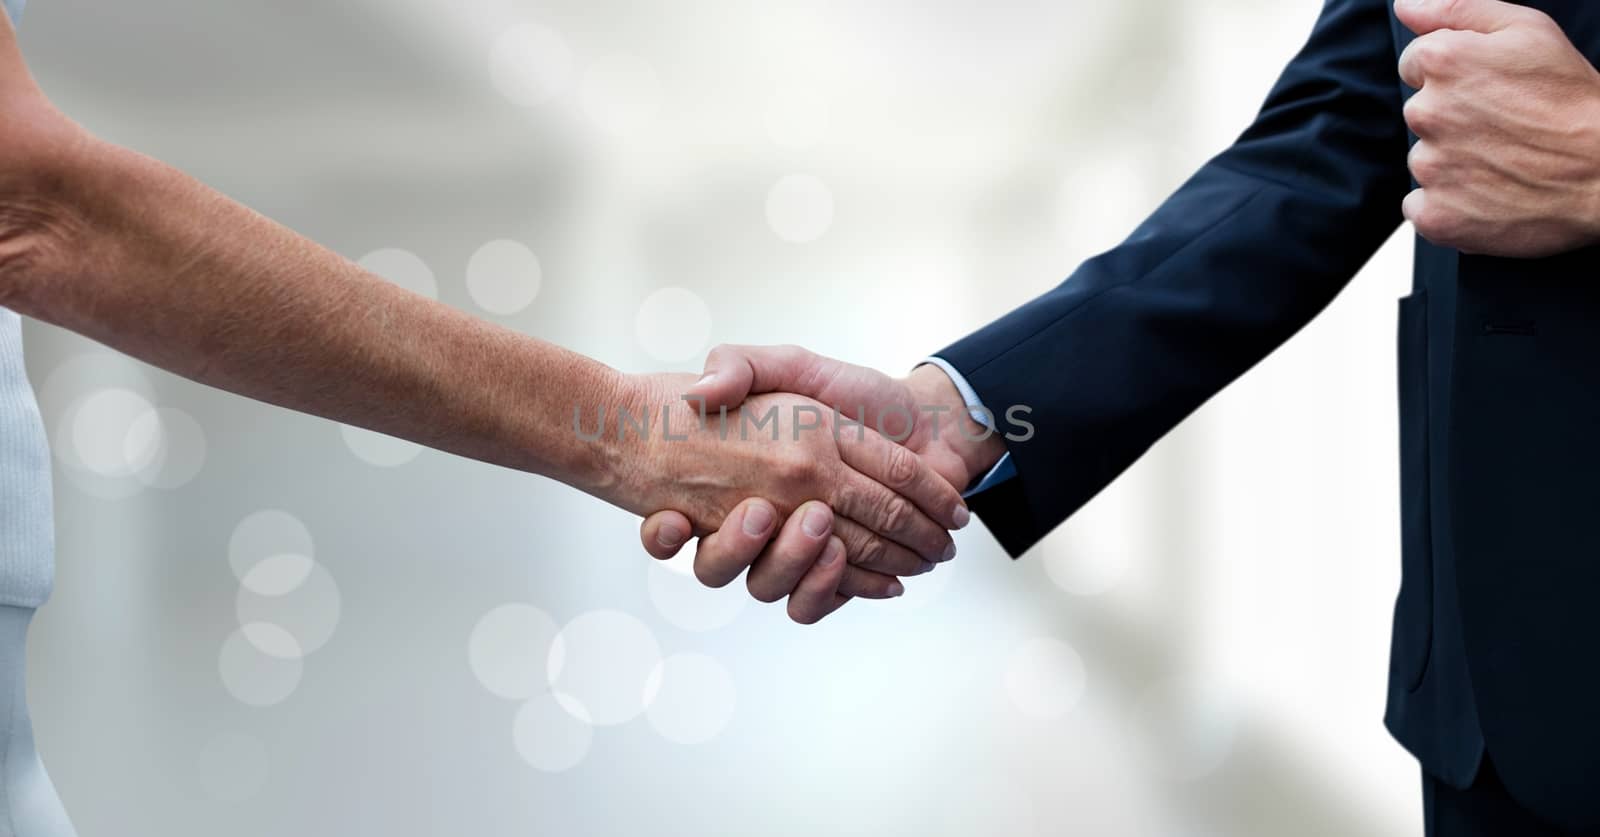 Digital composite of Business people shaking hands against blurred background